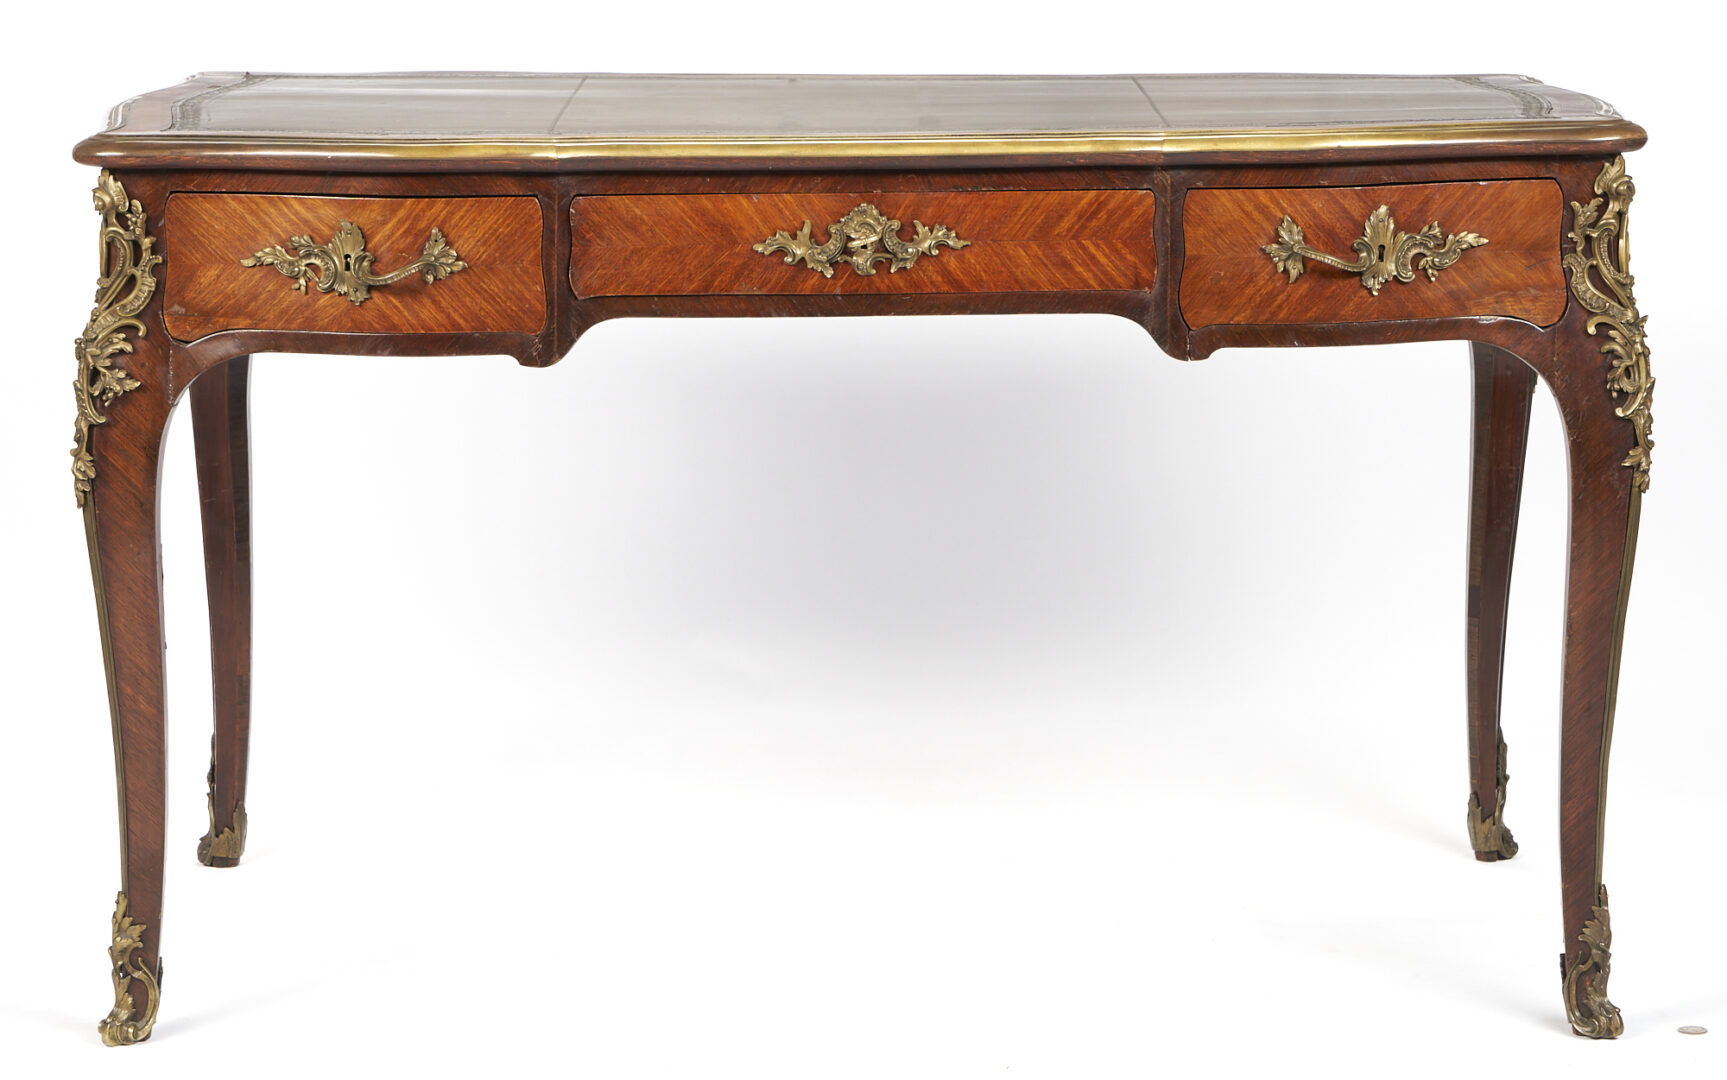 Lot 348: Louis XV Style Gilt Bronze Mounted Writing Table or Desk